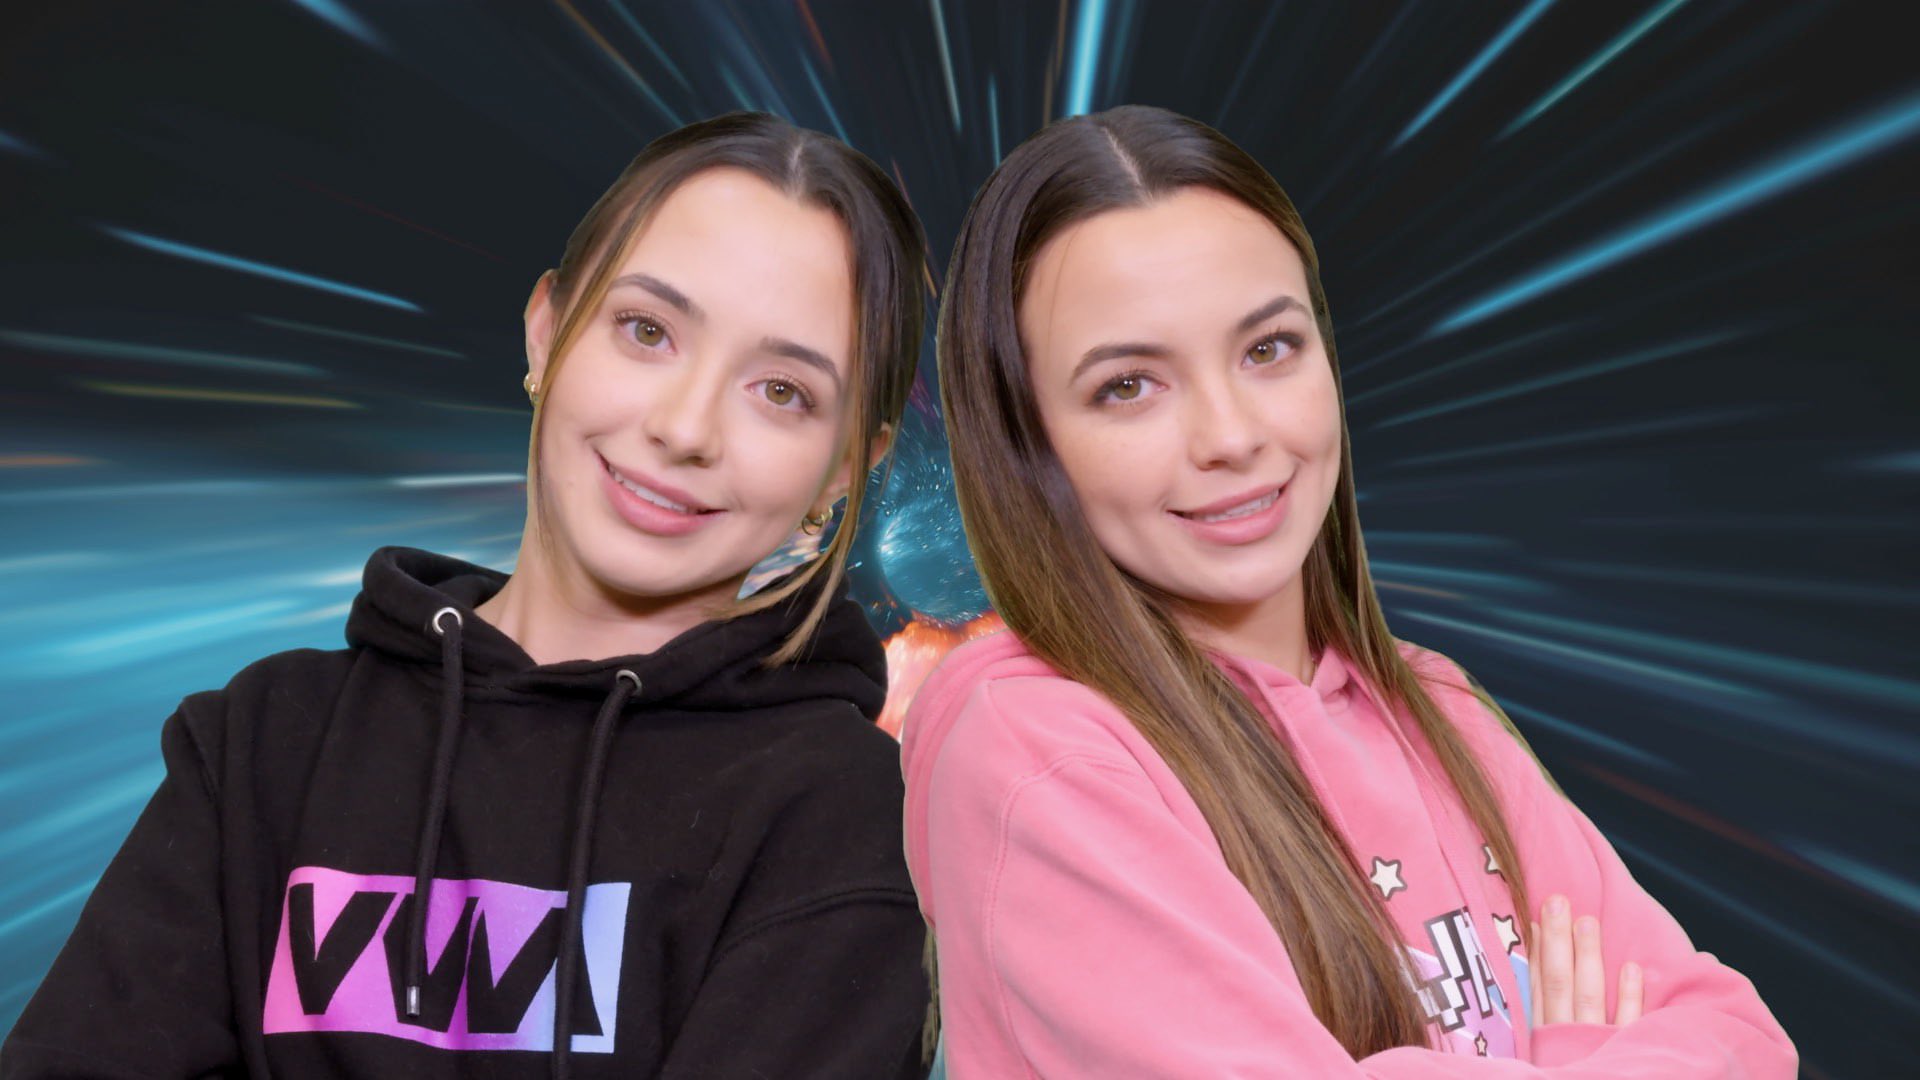 Merrell Twins on Twitter: "Thank you guys for 6 Million Subcribers!! We love you guys so much. In of 6 million subscribers we made a music videos for you